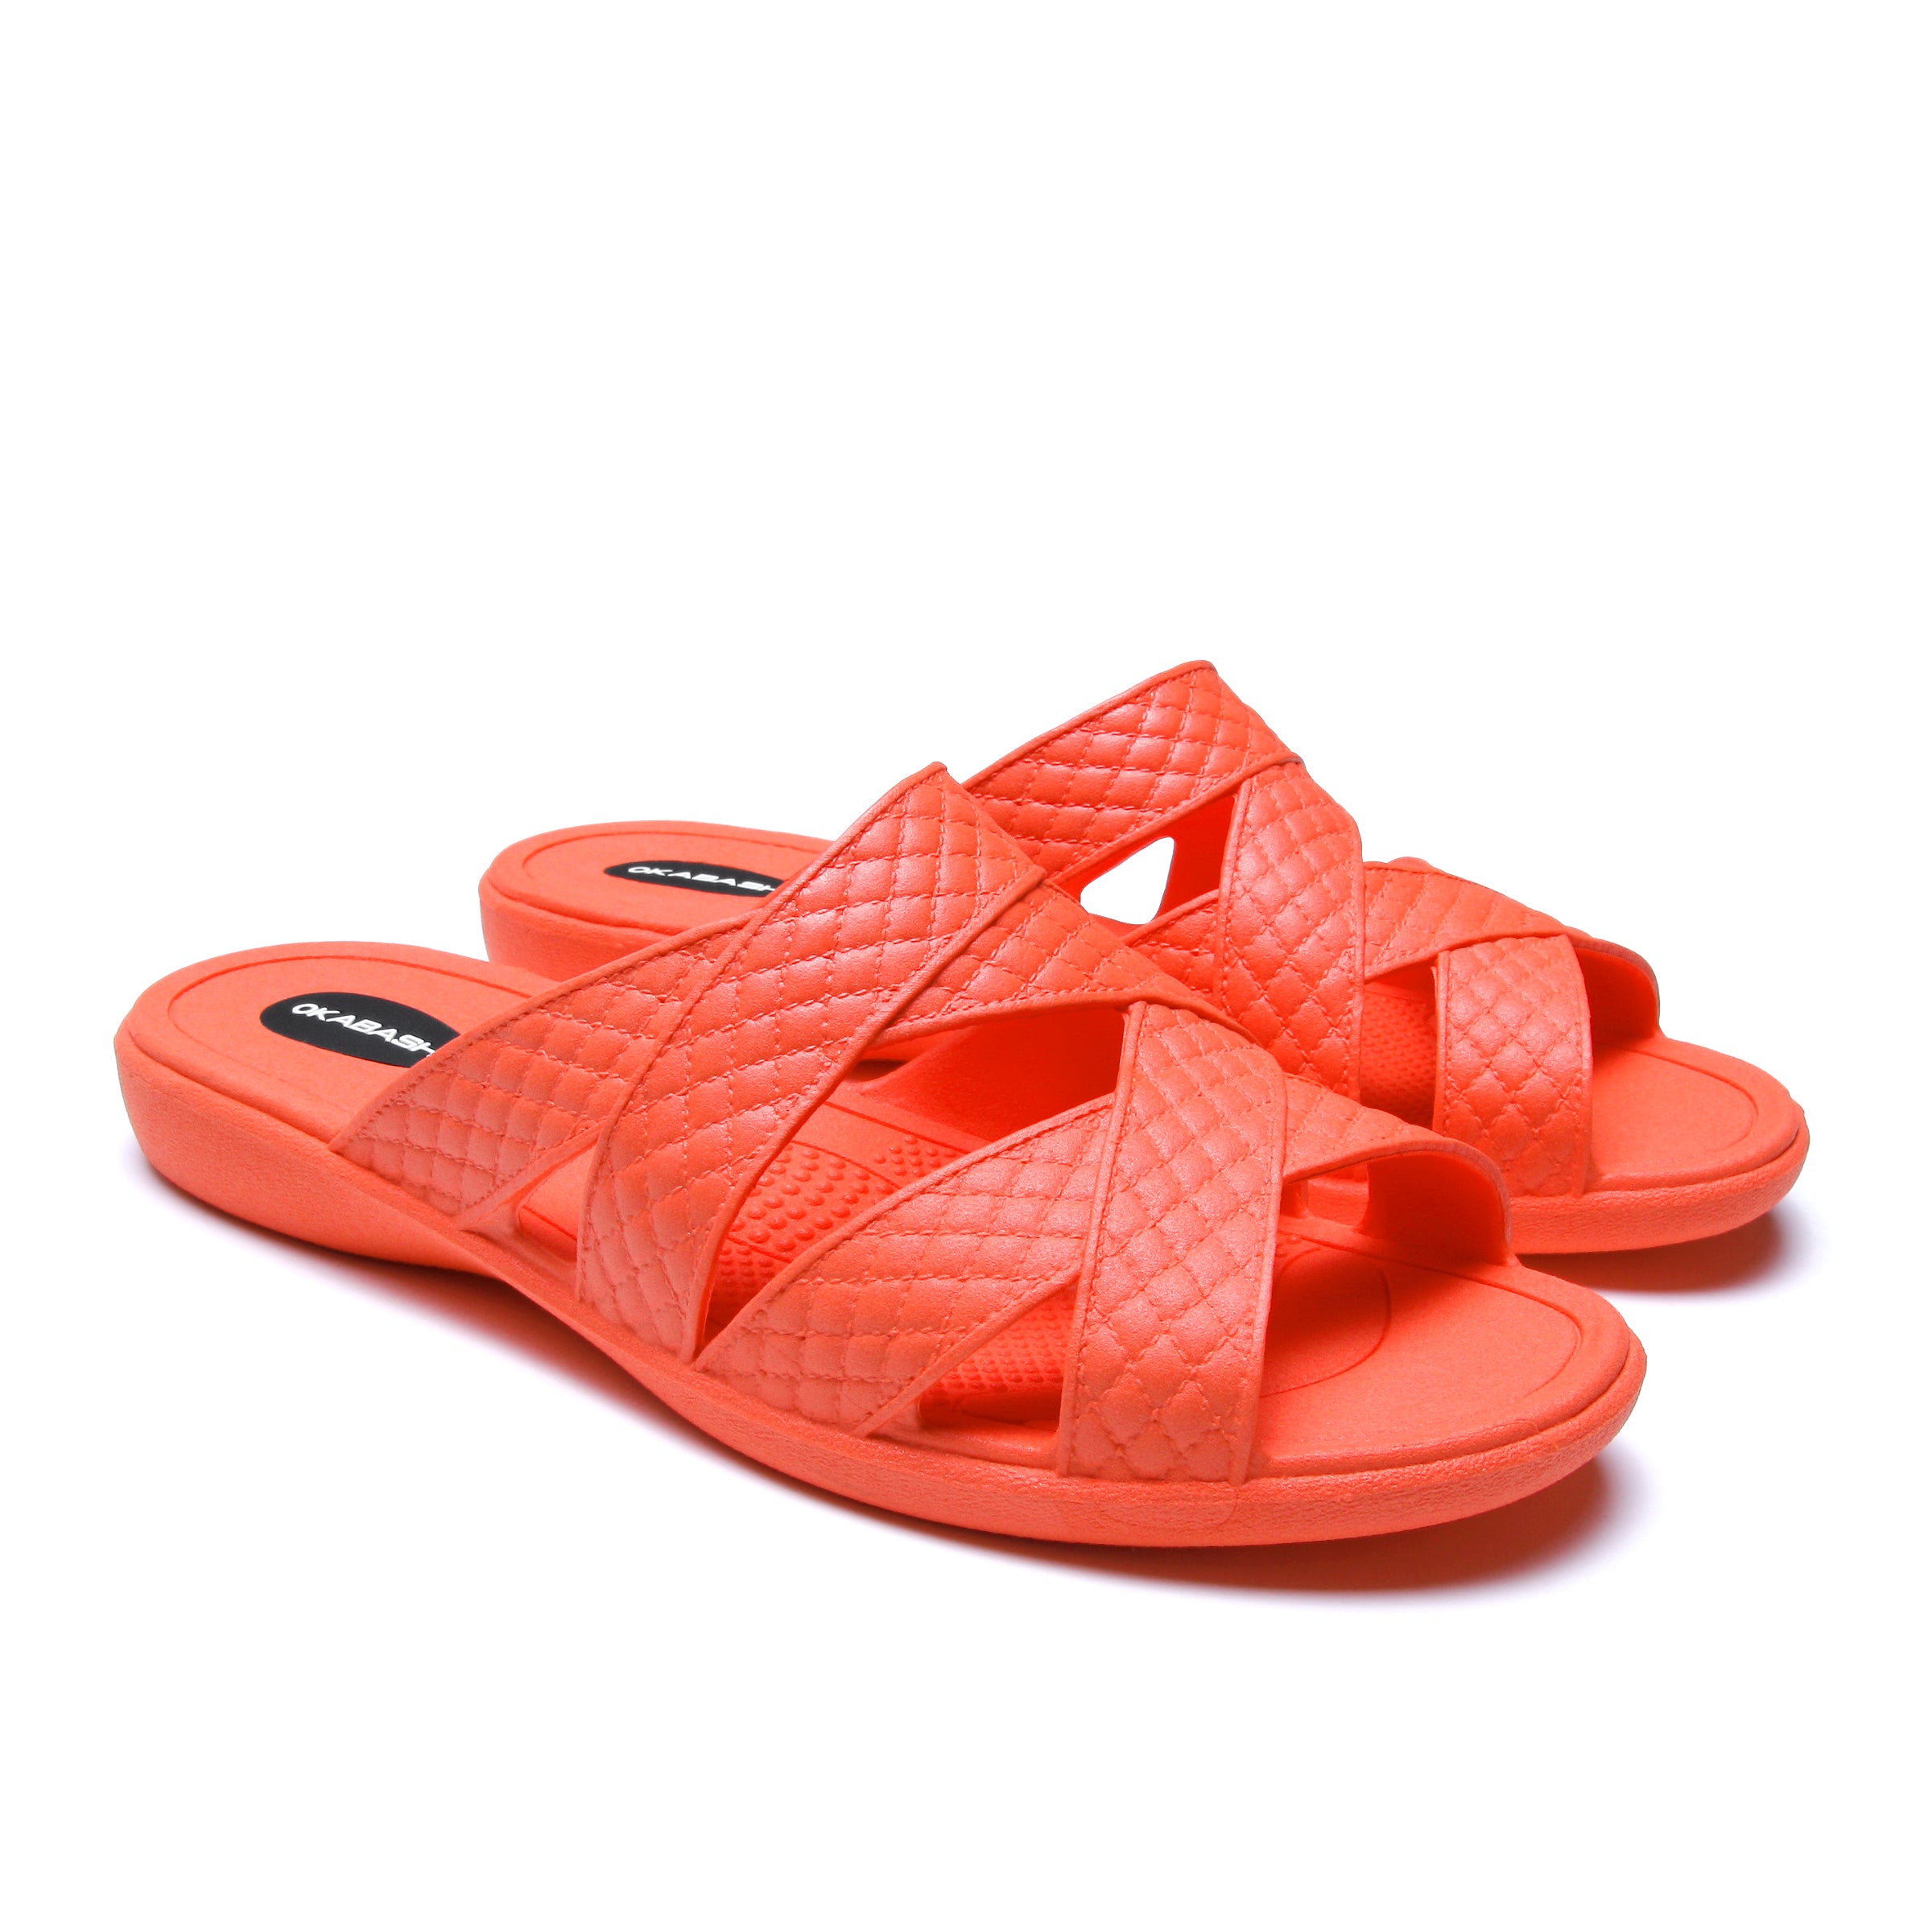 Cross Strap, Eco-Friendly Women's Sandal, Made in USA